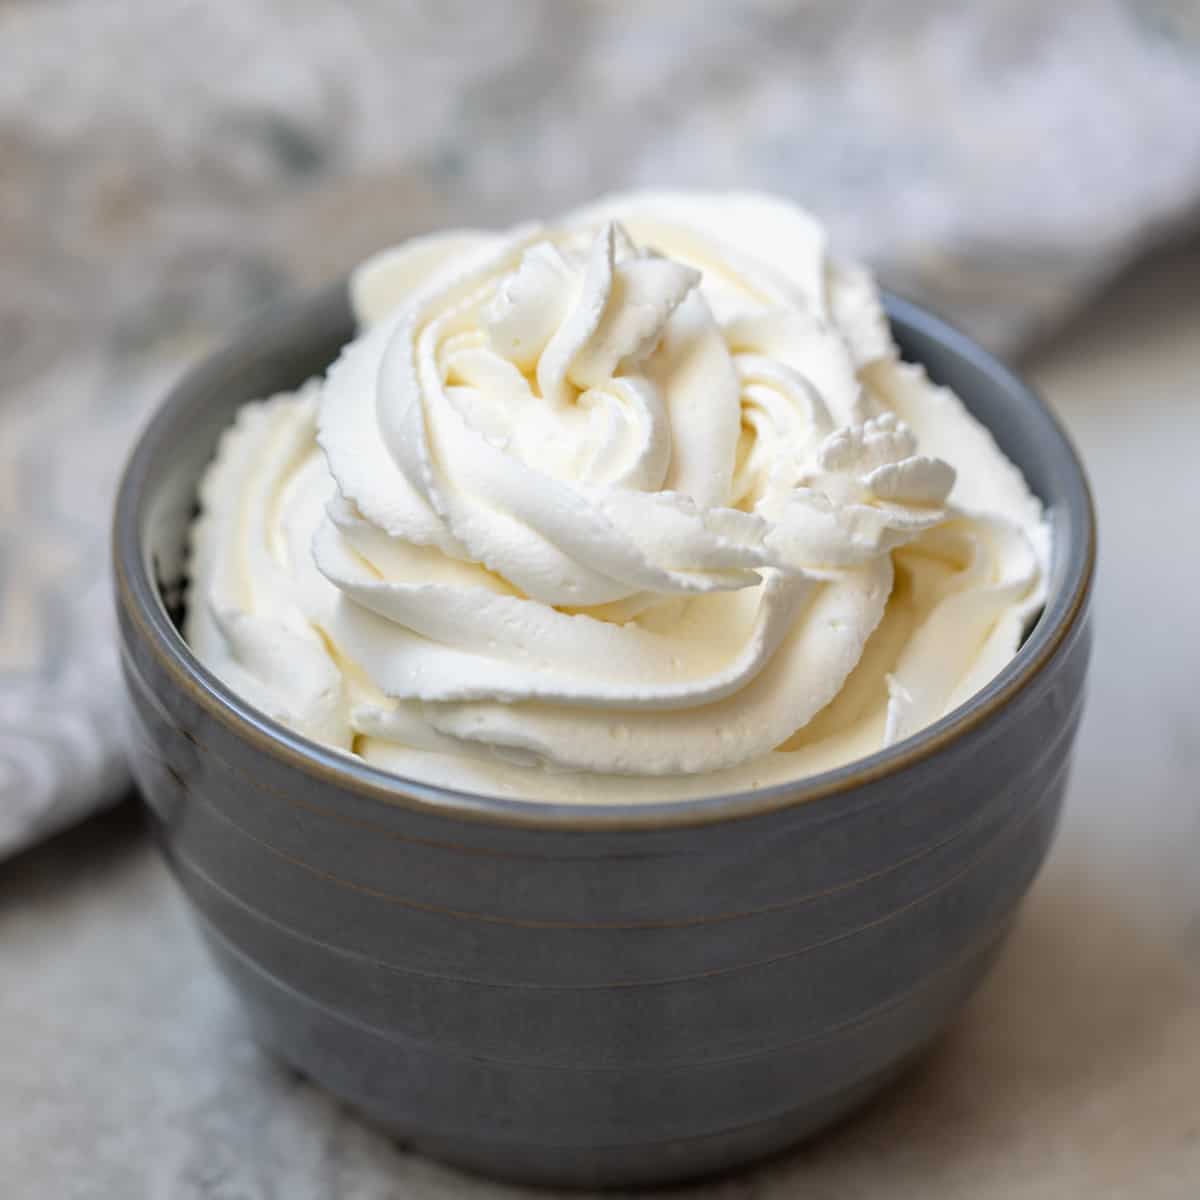 Nude whipped cream